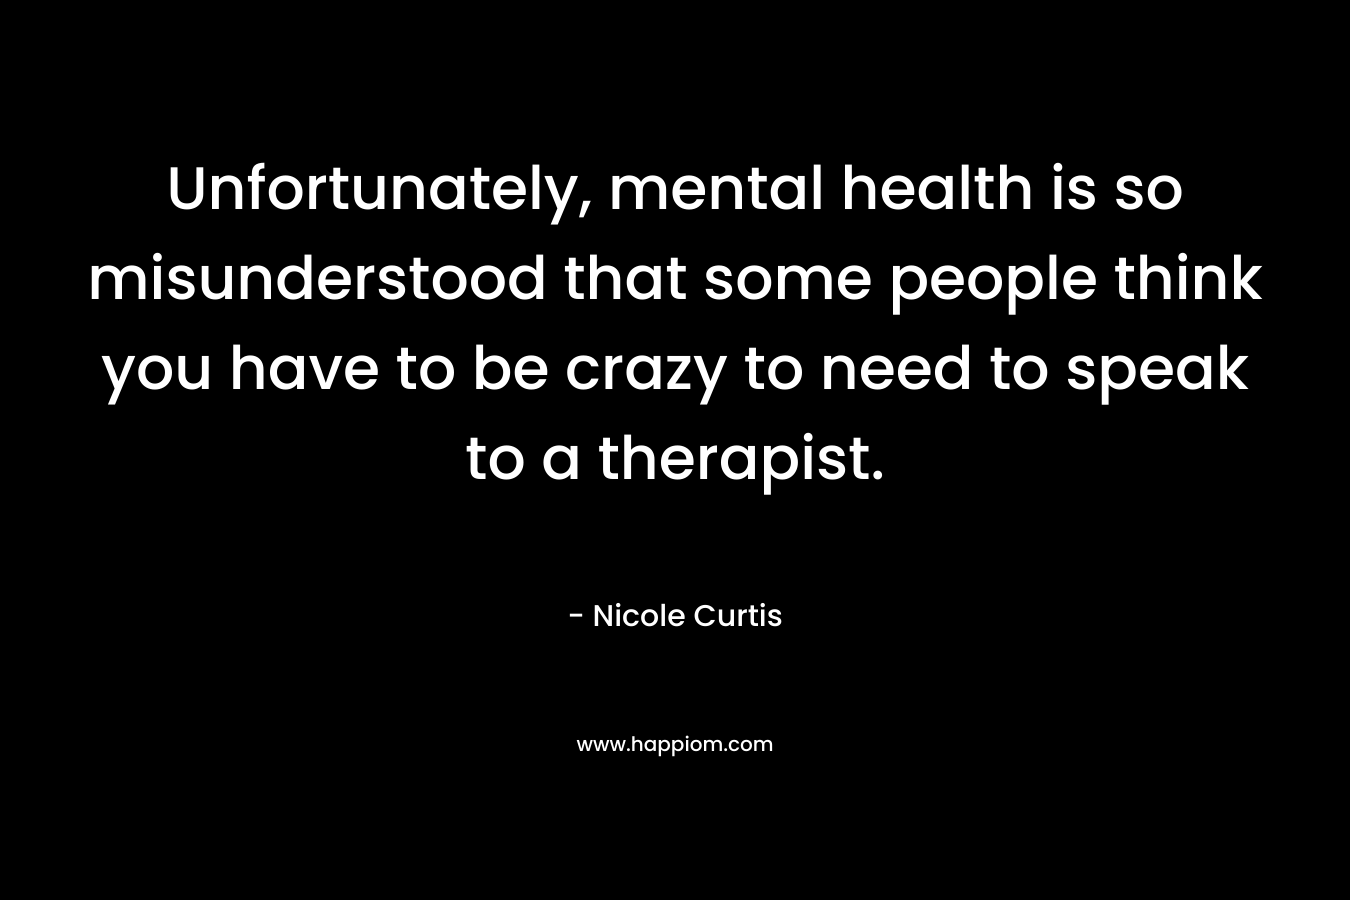 Unfortunately, mental health is so misunderstood that some people think you have to be crazy to need to speak to a therapist. – Nicole Curtis